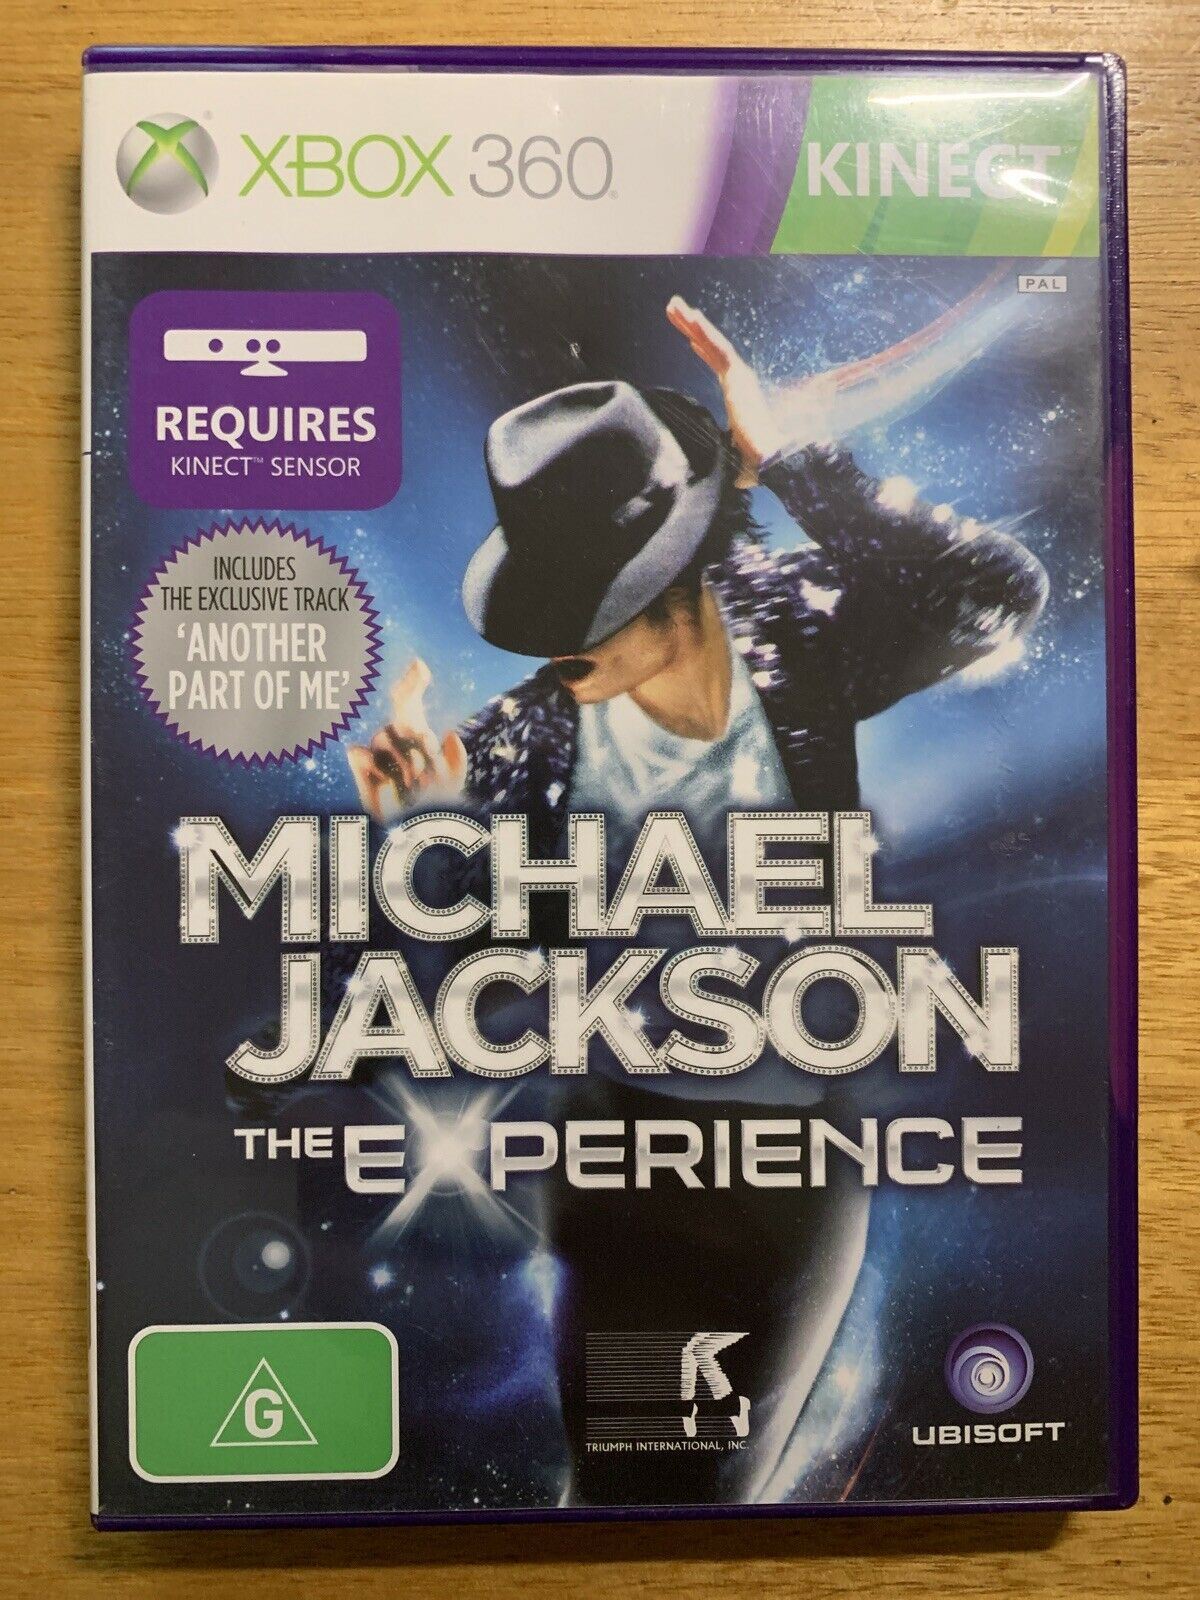 Kinect Camera + Michael Jackson The Experience for XBOX 360 with Manual